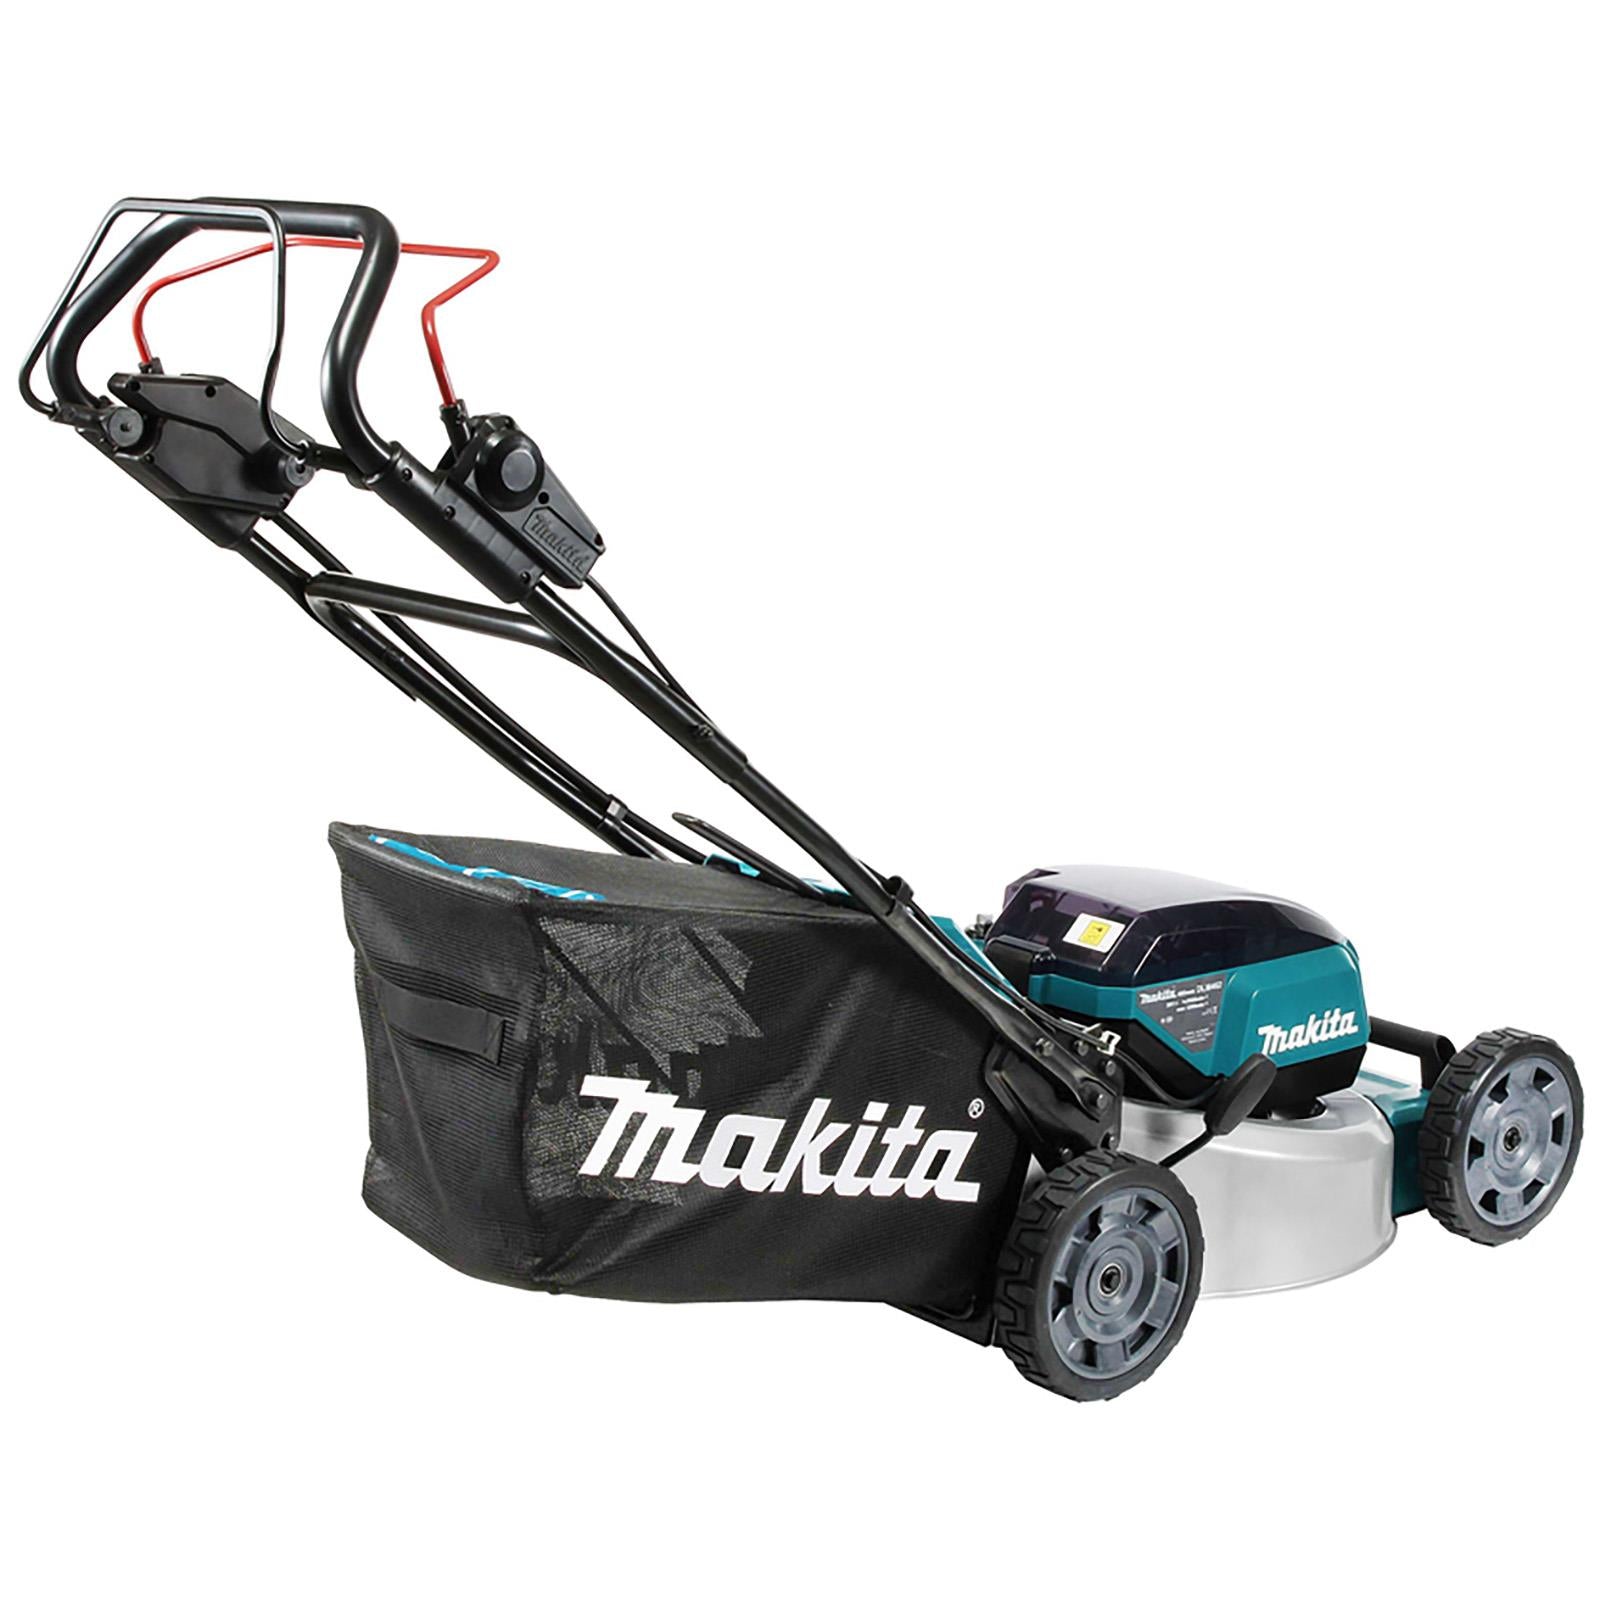 Makita 46cm Lawn Mower Kit Twin 18V LXT Li-ion Cordless Garden Grass Outdoor 2 x 6Ah Battery and Dual Rapid Charger DLM462PG2